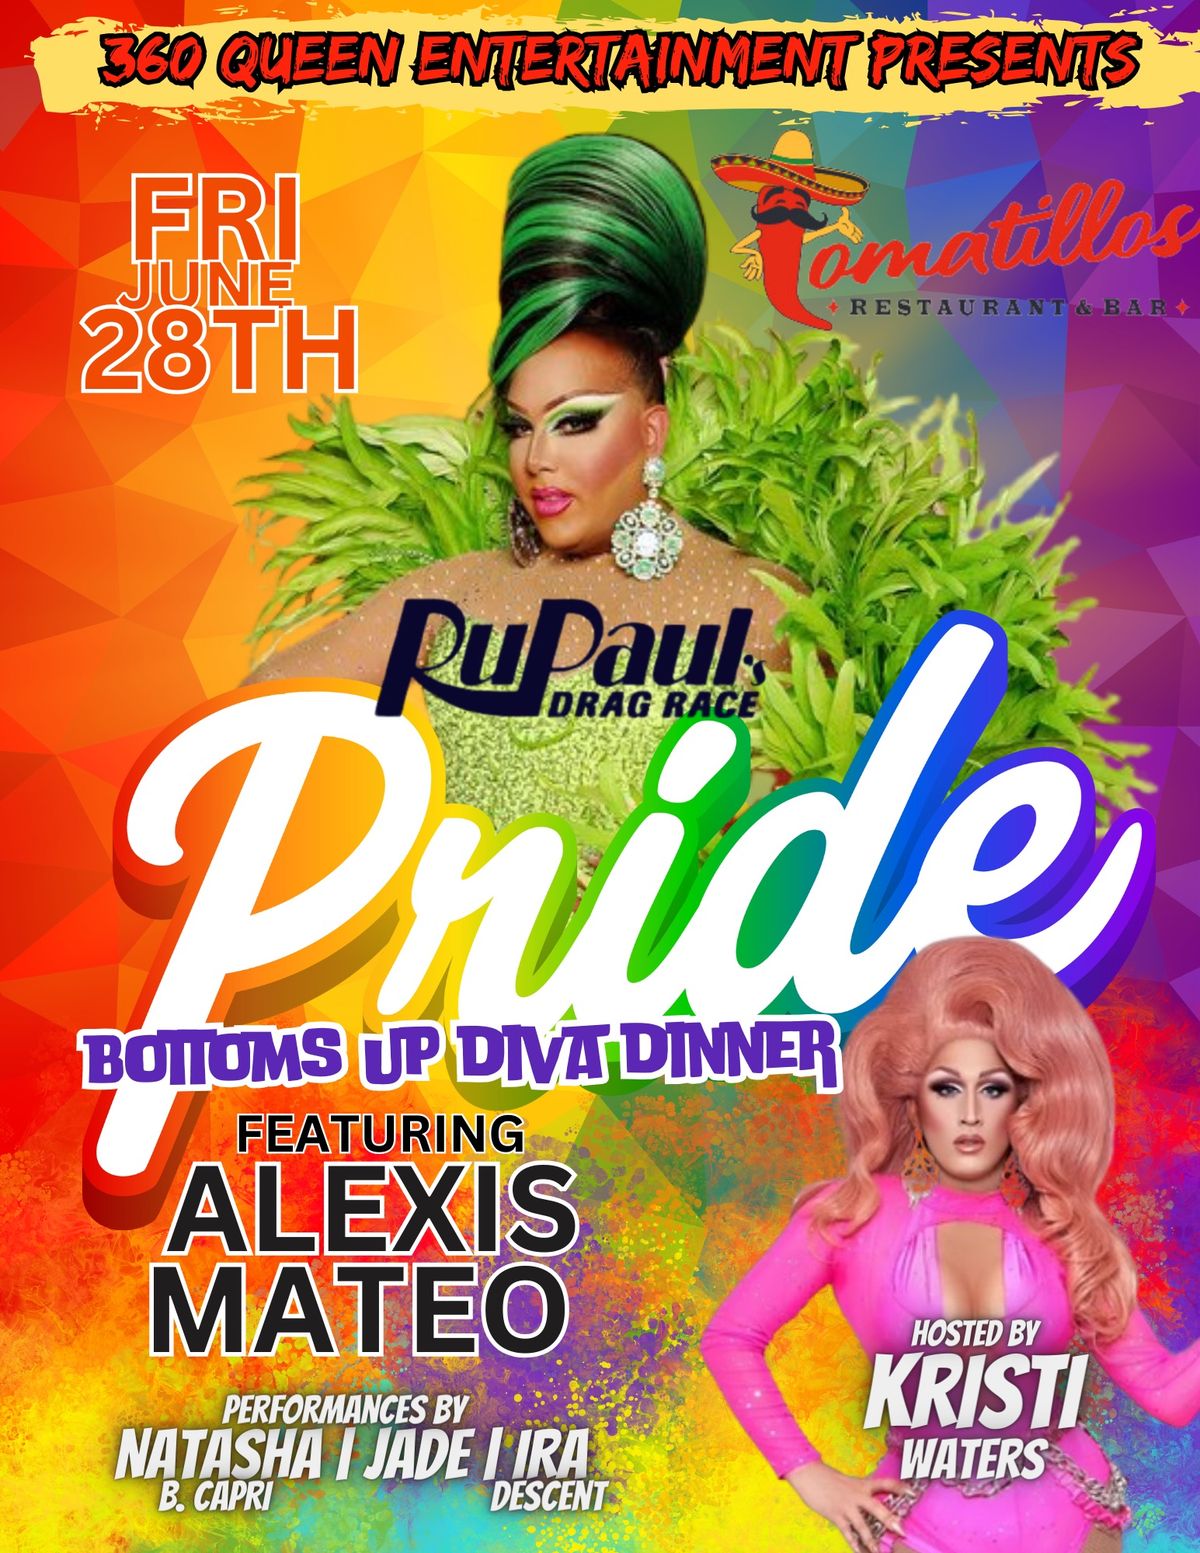 THE BOTTOMS UP DIVA DINNER: PRIDE EDITION featuring ALEXIS MATEO